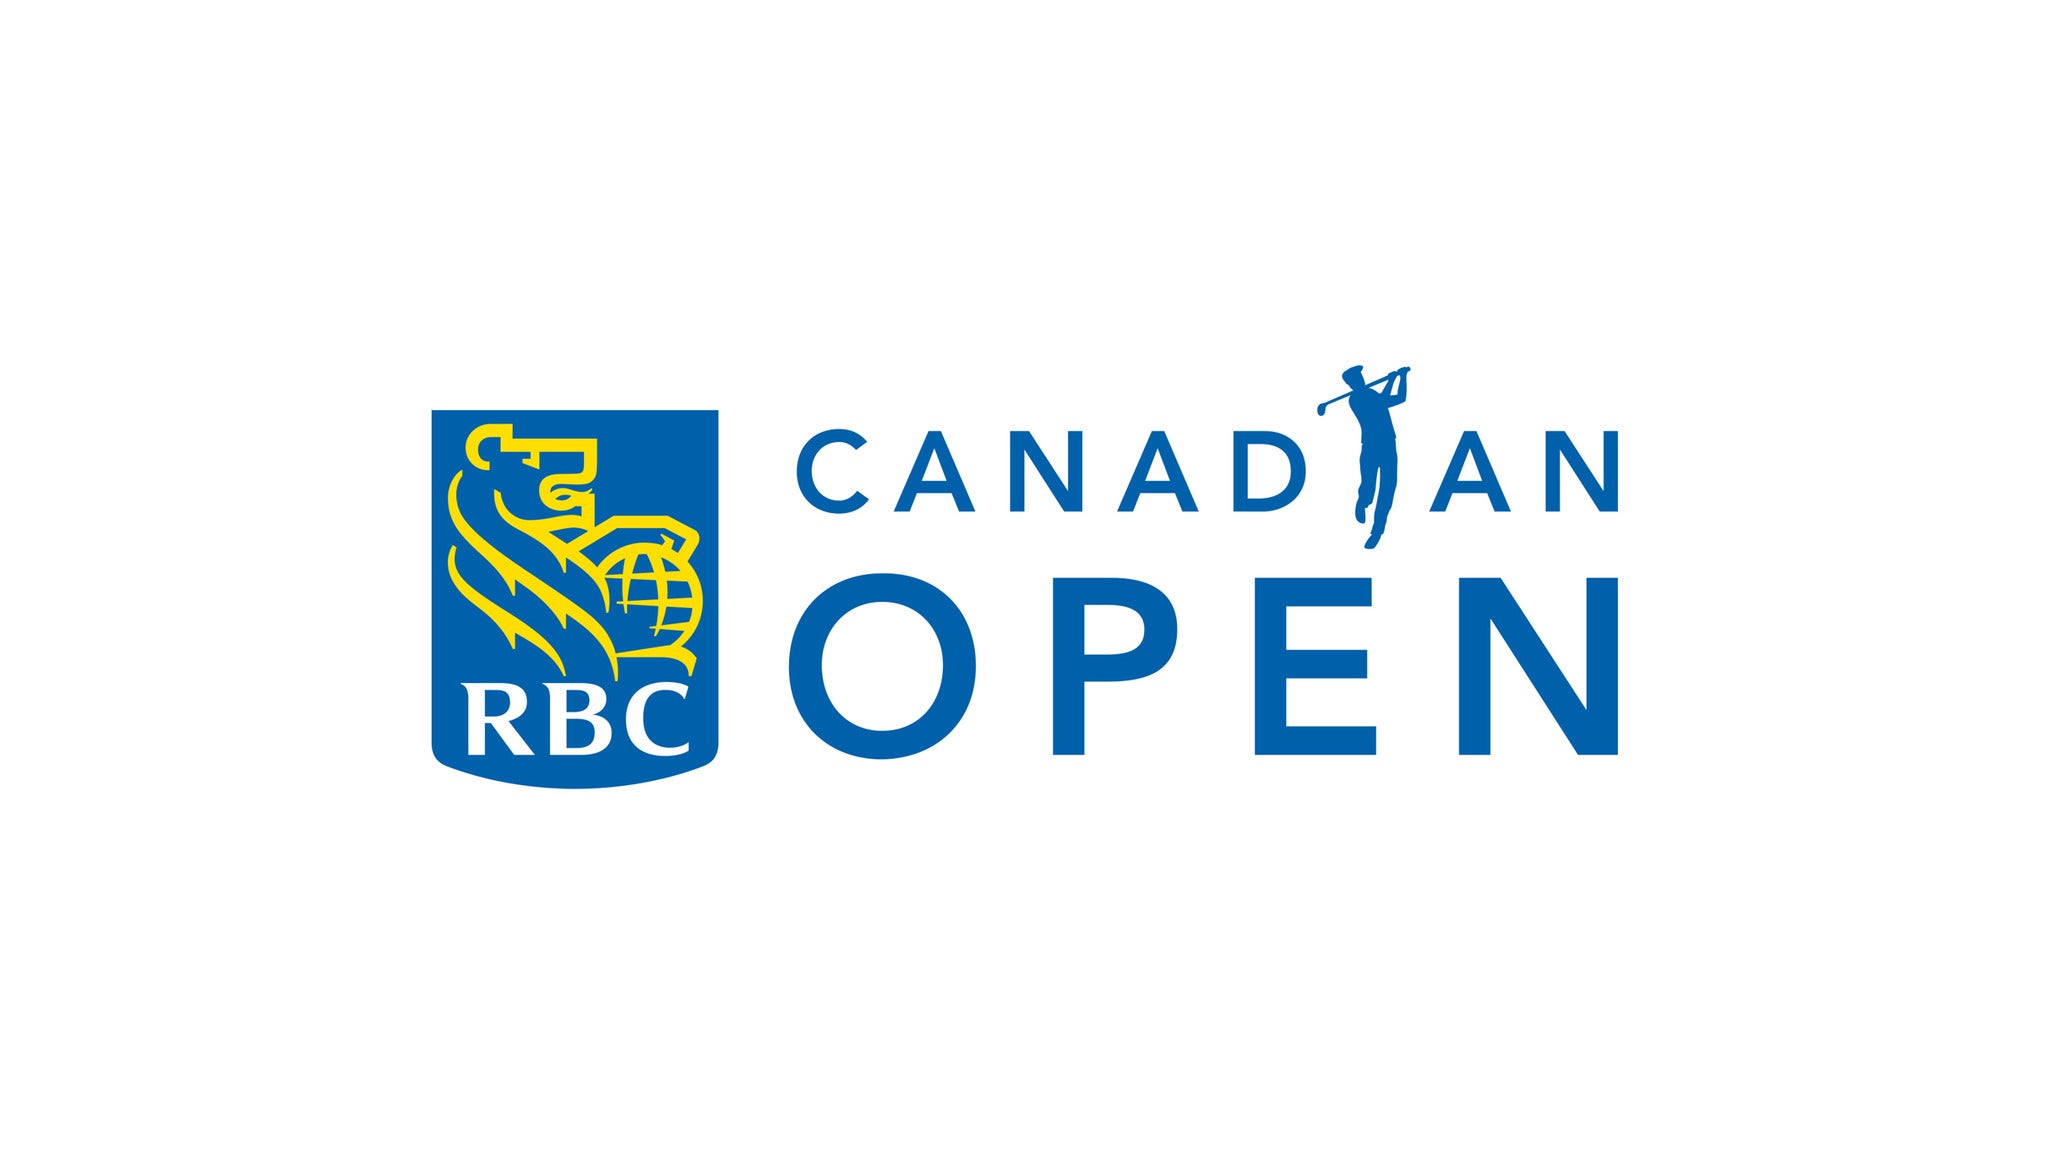 RBC Canadian Open Saturday Admission/RBCxMusic Concert in Toronto promo photo for Golf Canada presale offer code